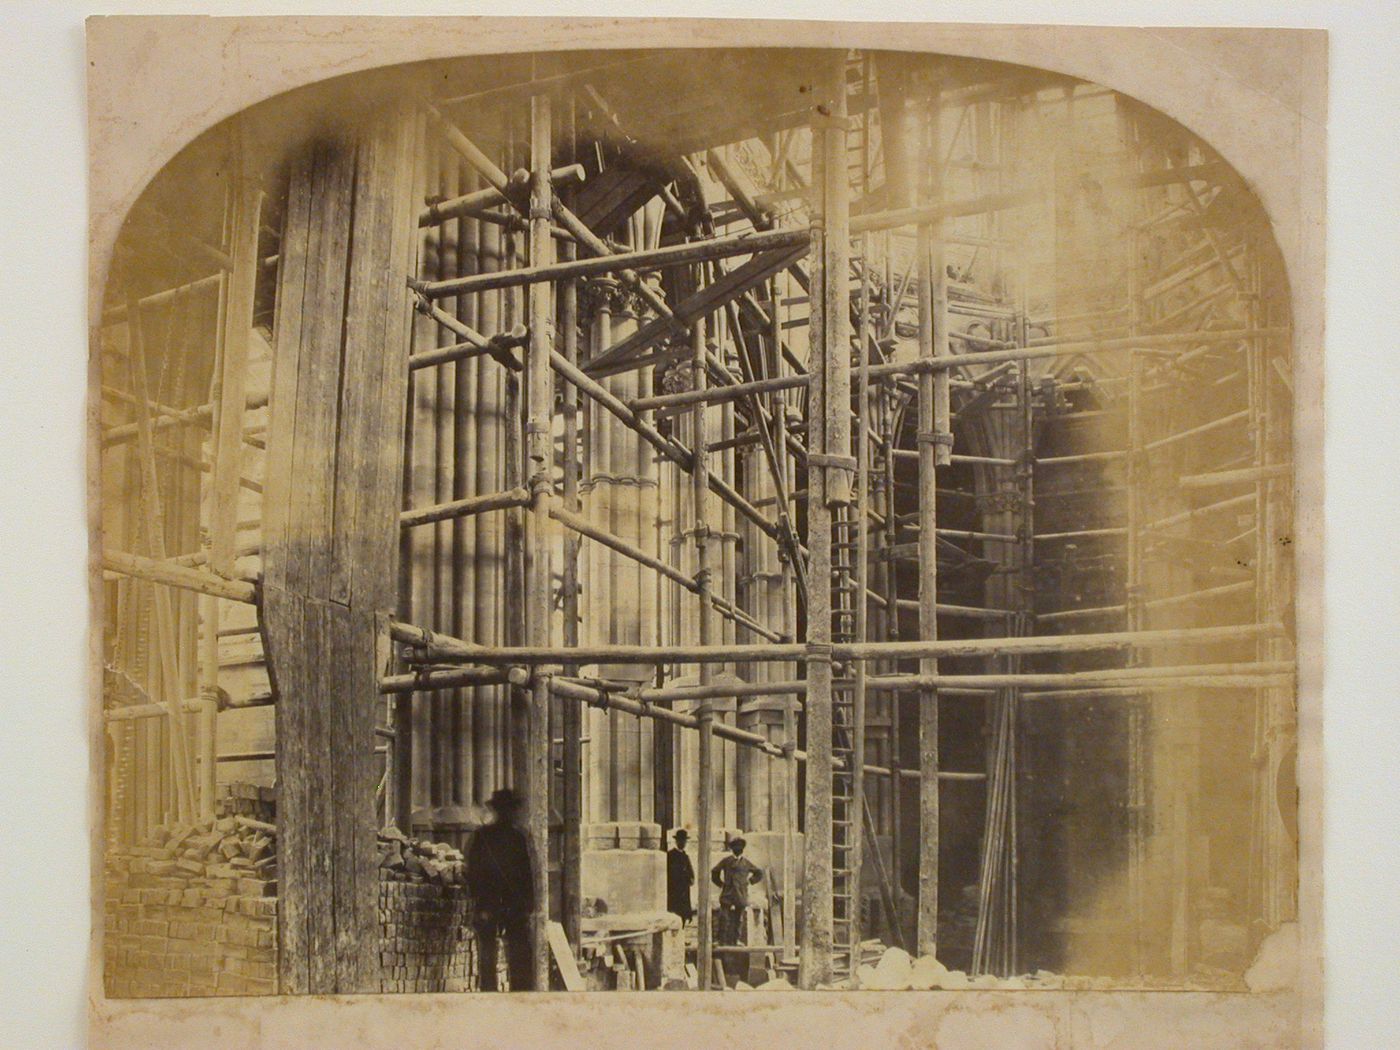 Interior view of the Church of St. Philip Neri (now the Cathedral of Our Lady and St. Philip Howard) under construction, prior to the construction of the floor and showing scaffolds, construction material and men, Arundel, West Sussex, England